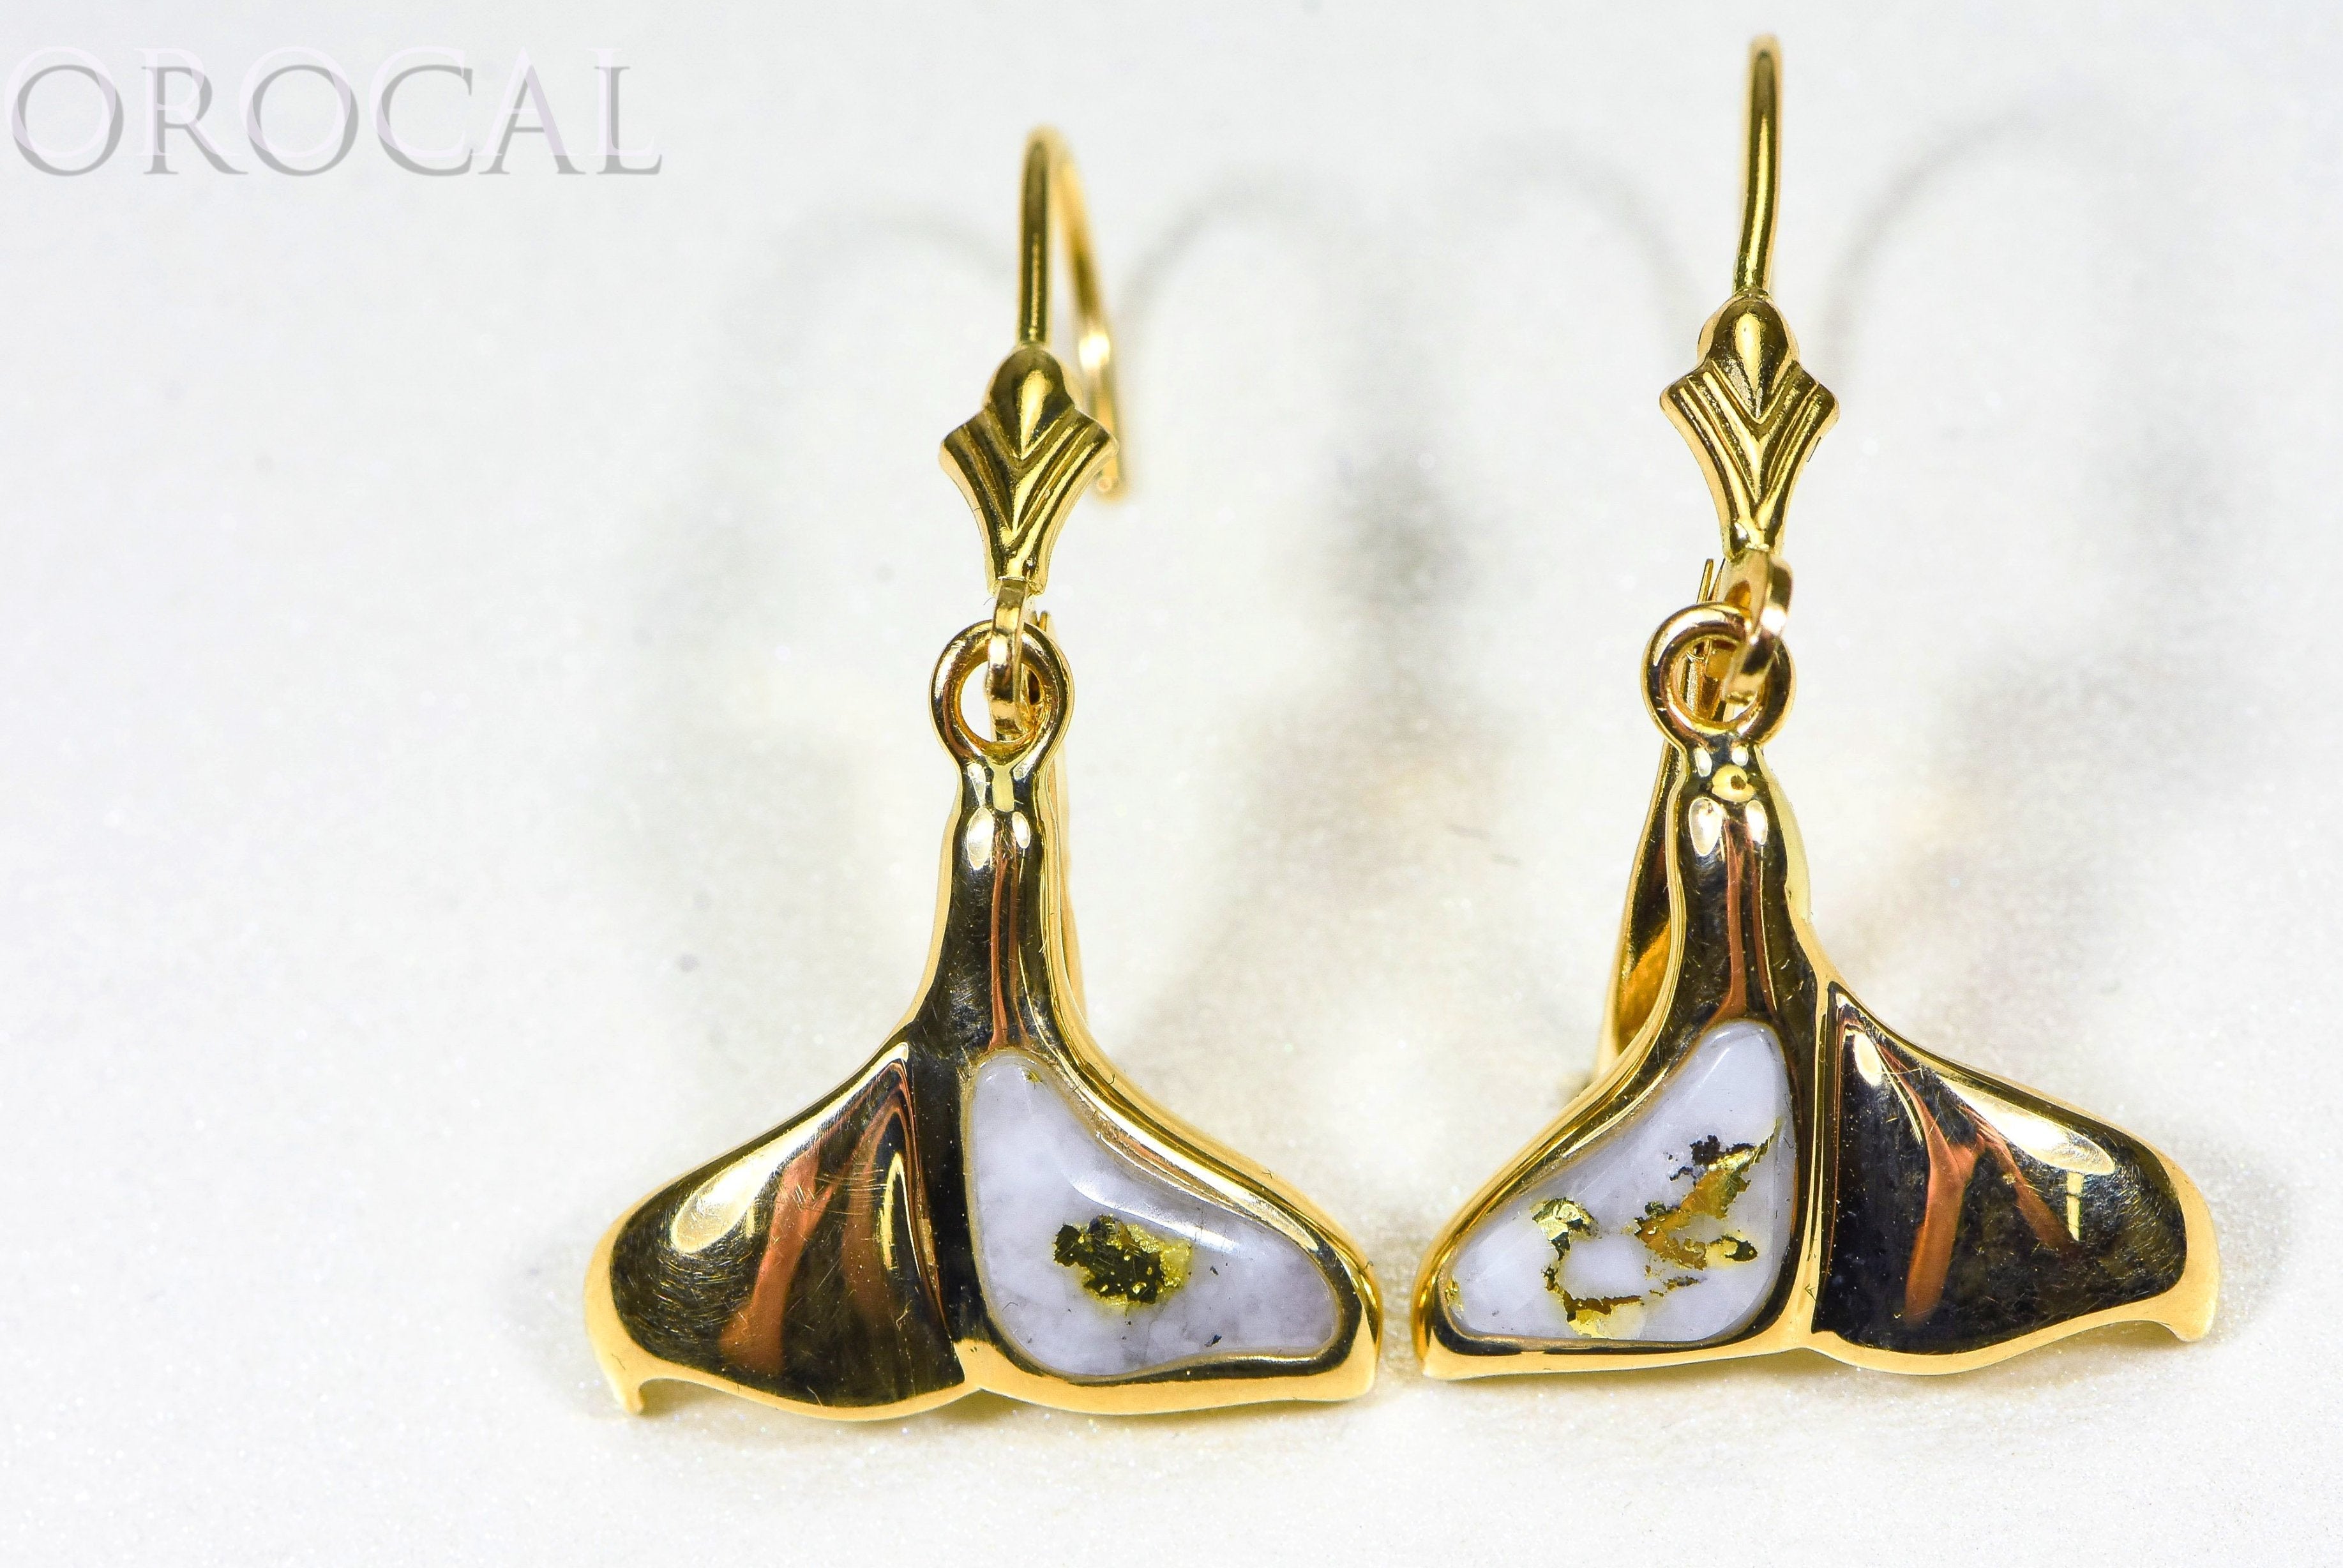 Gold Quartz Earrings "Orocal" EDLWT12Q/LB Genuine Hand Crafted Jewelry - 14K Gold Casting